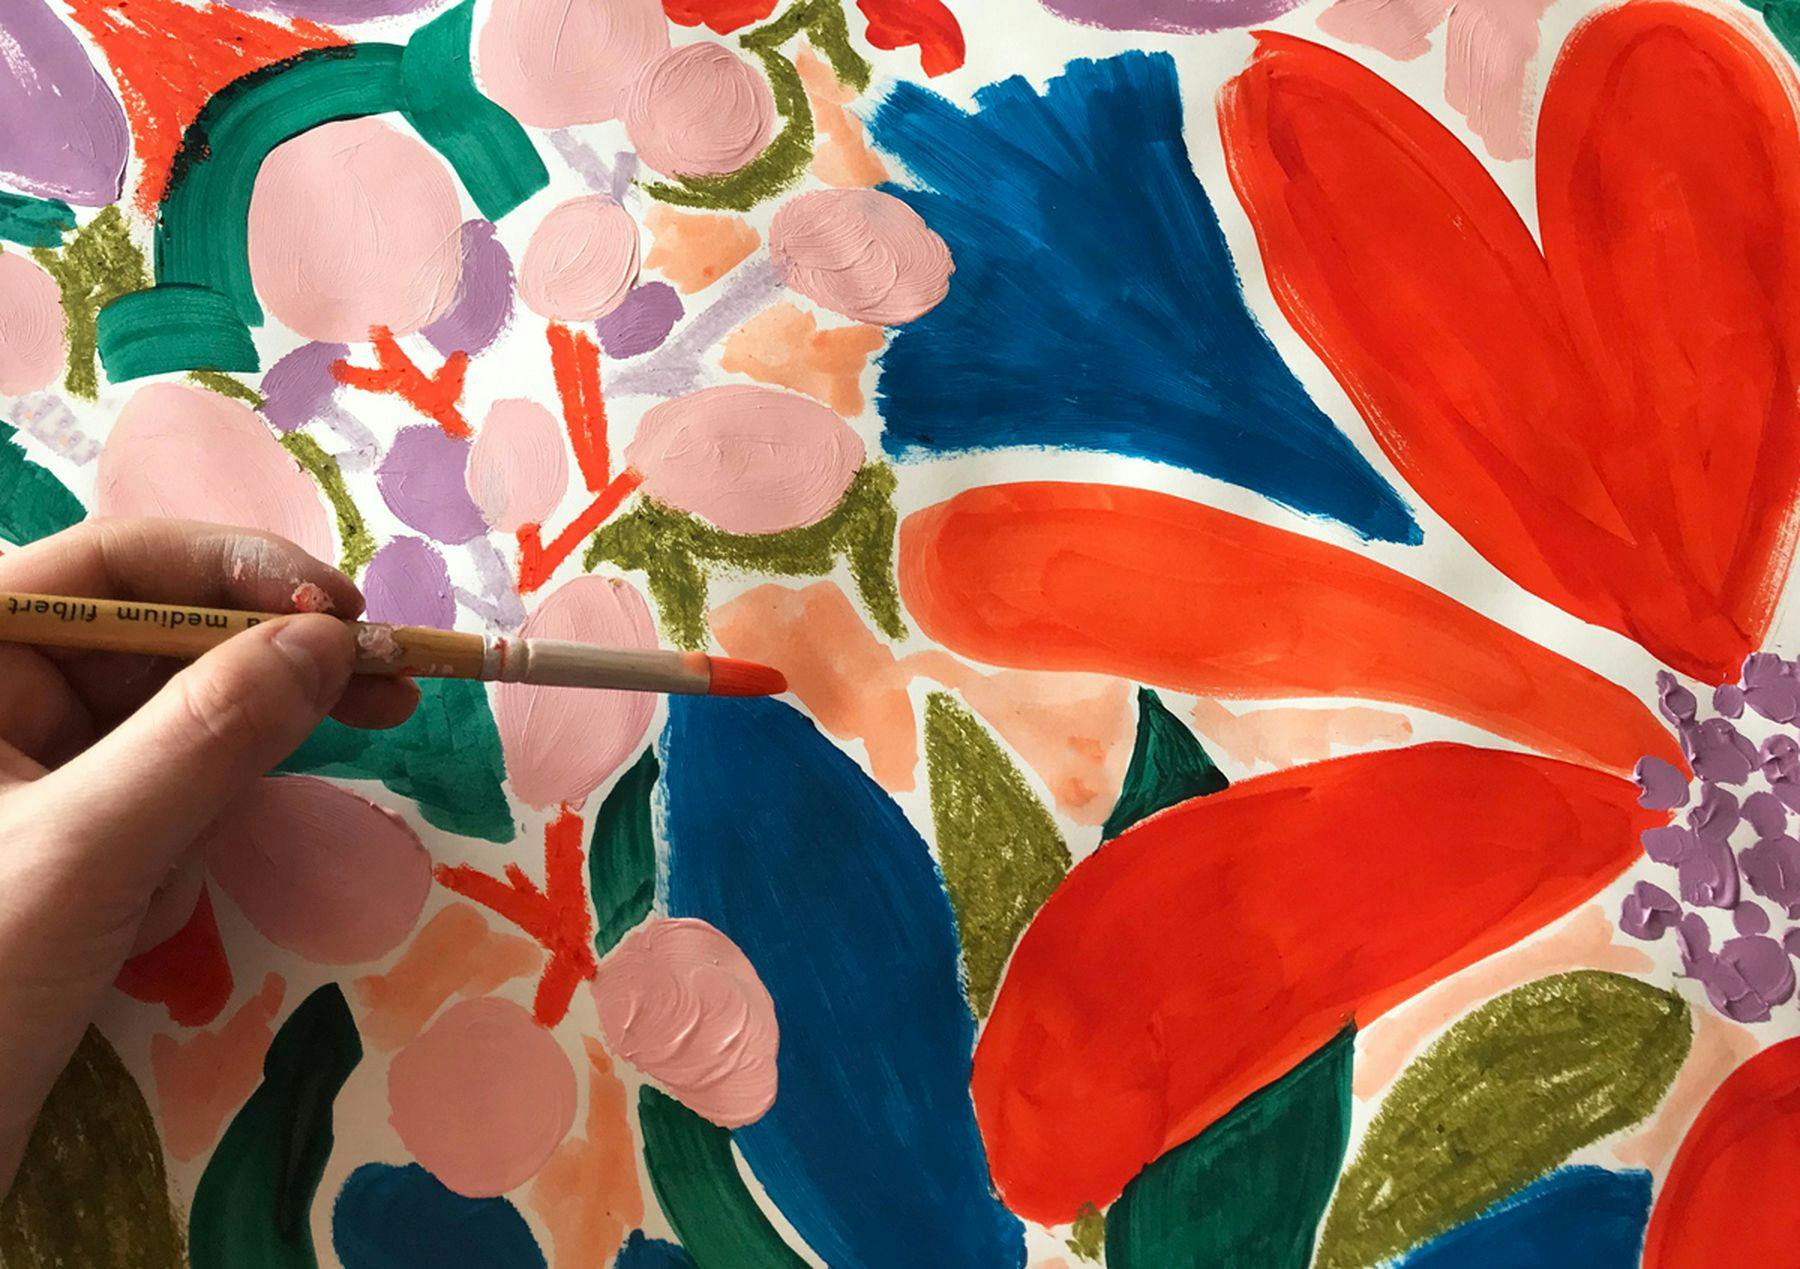 A close-up photograph of a hand painting a colourful floral design on a canvas. The flowers’ colours include orange, blue, pink and green.